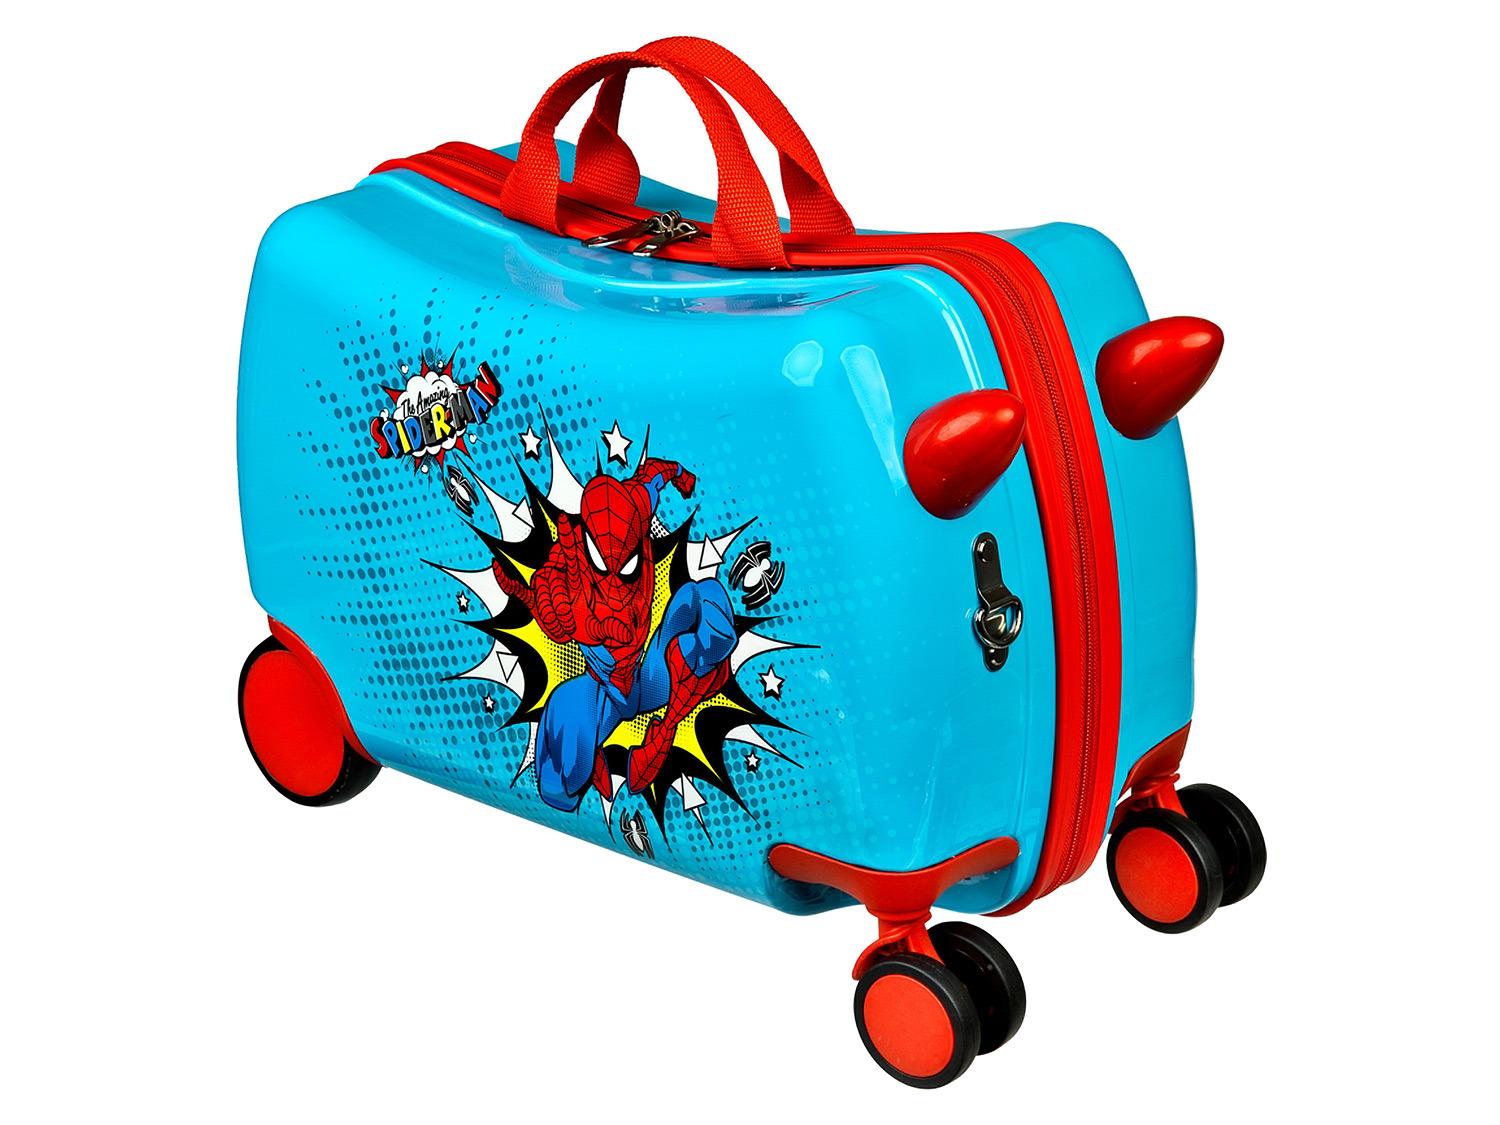 Undercover »Spiderman« Polycarbonat Ride-on Trolley, K…